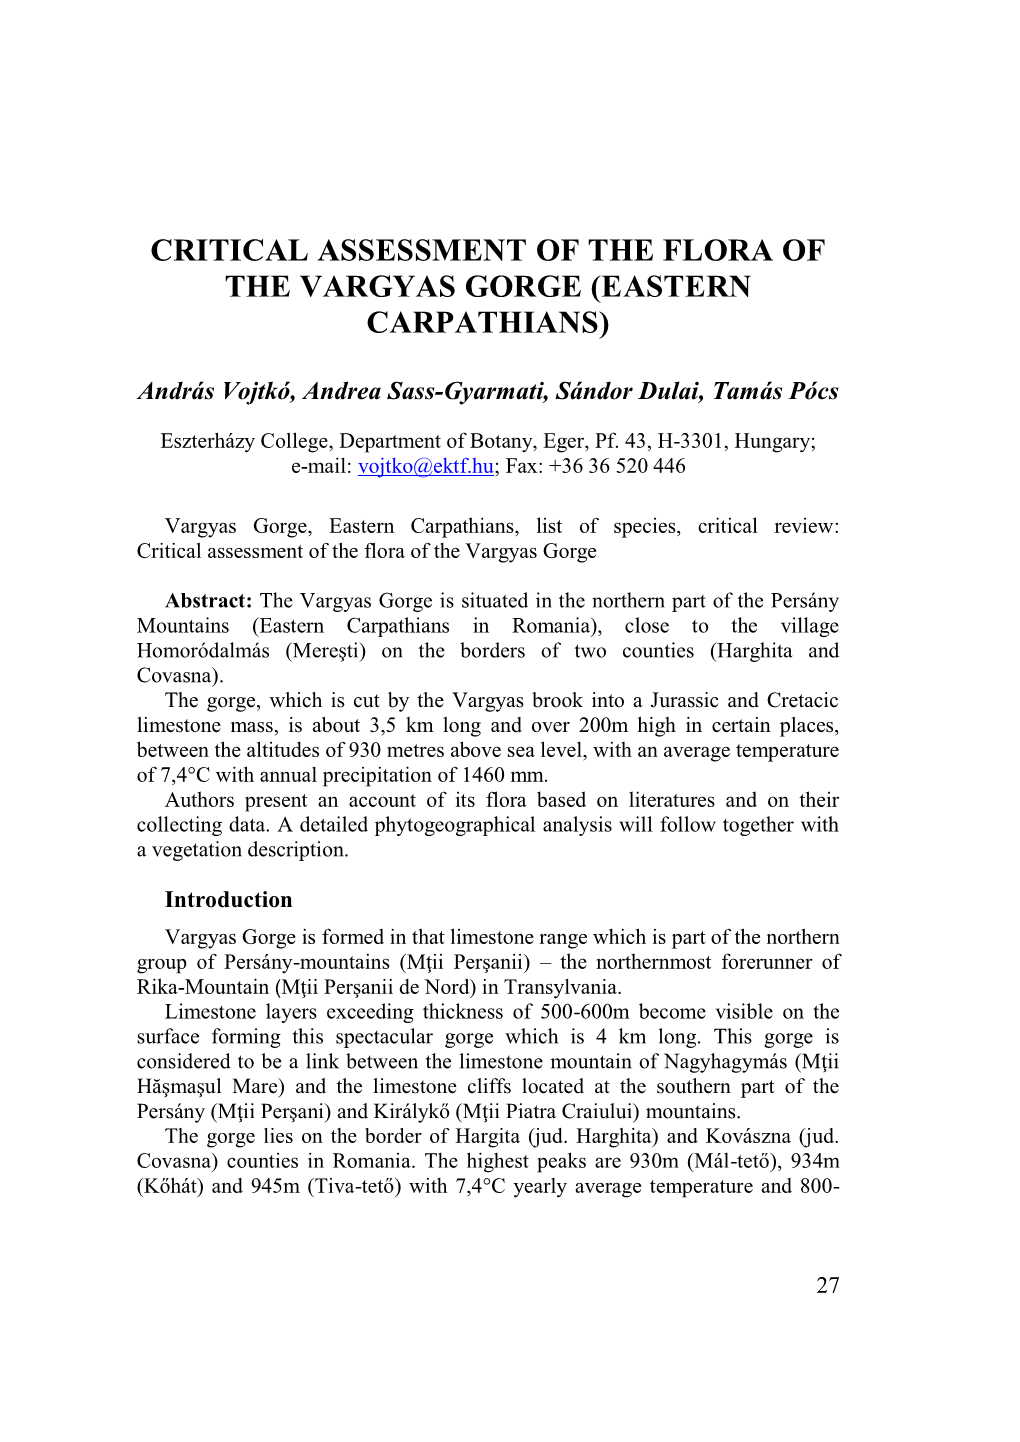 Critical Assessment of the Flora of the Vargyas Gorge (Eastern Carpathians)